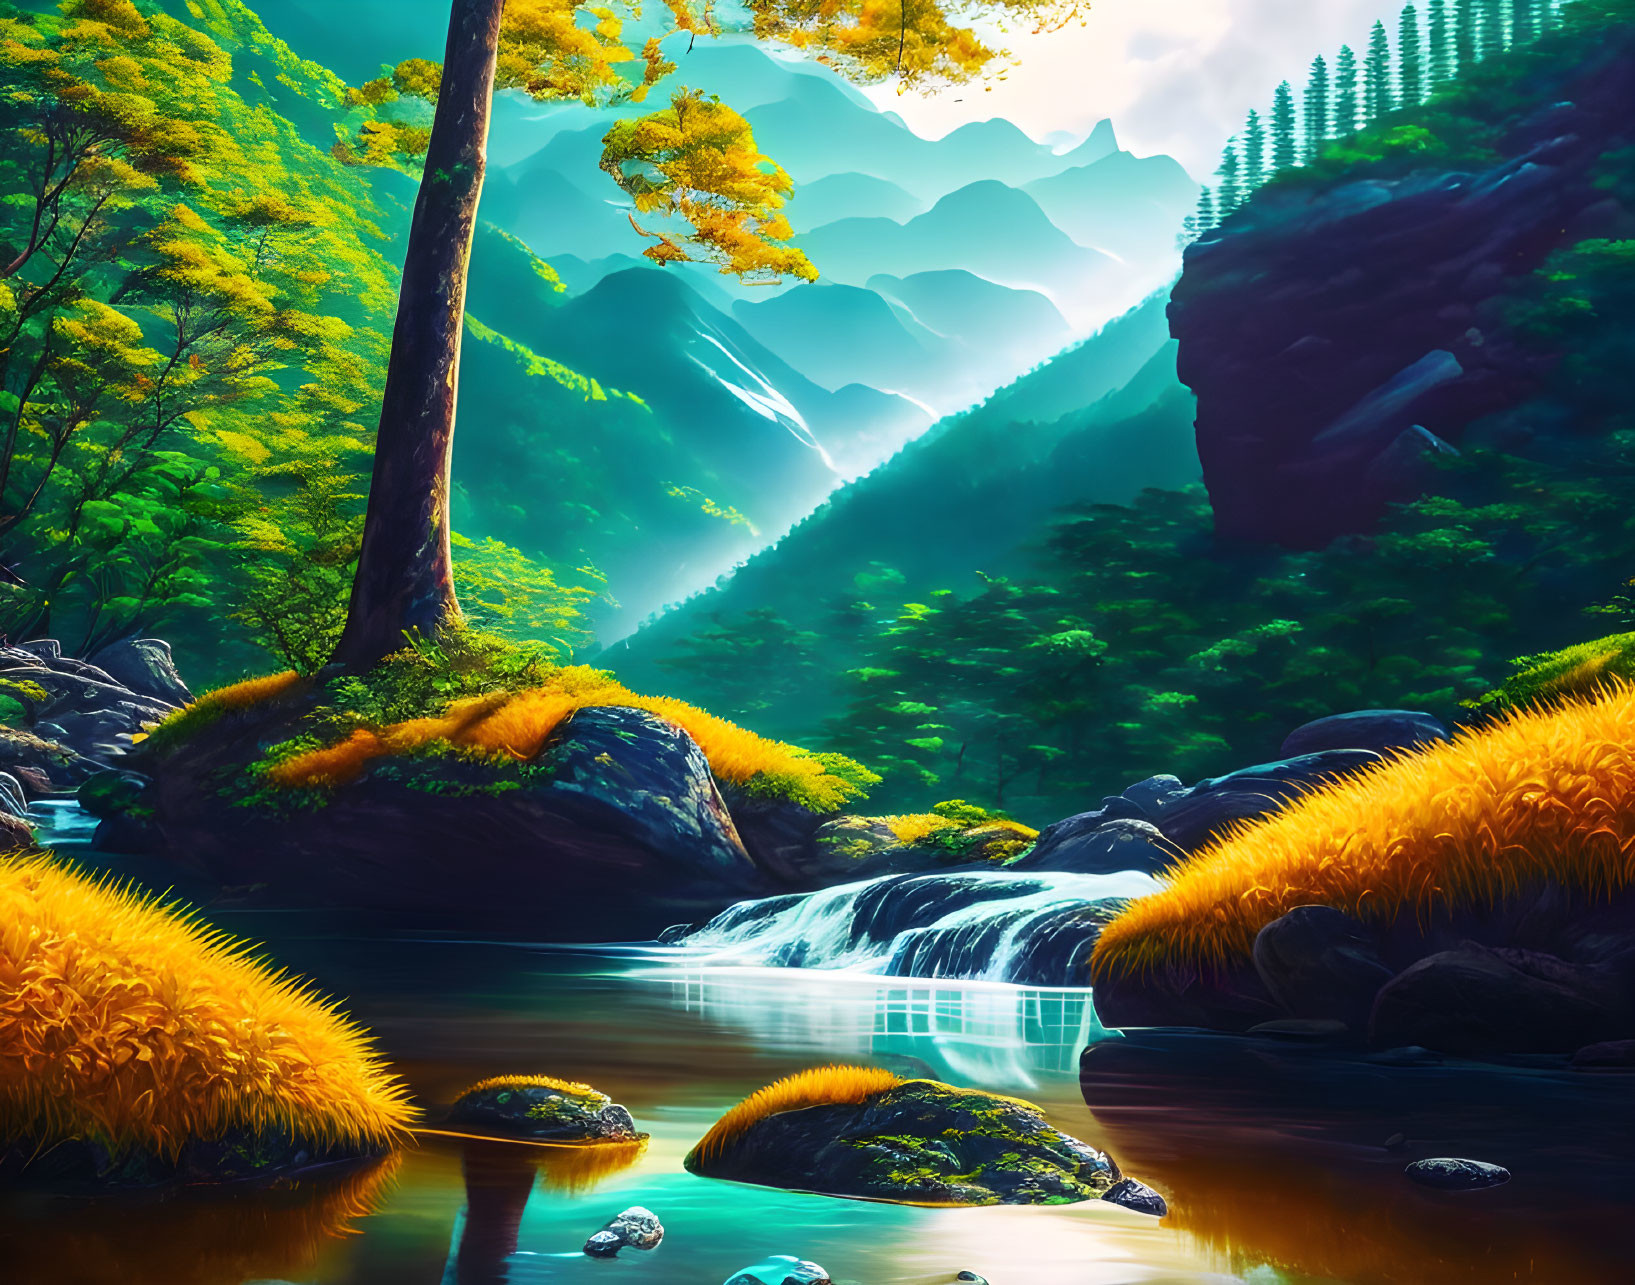 Serene forest landscape with golden foliage, stream, sunbeams, mountains, and moss-covered rocks